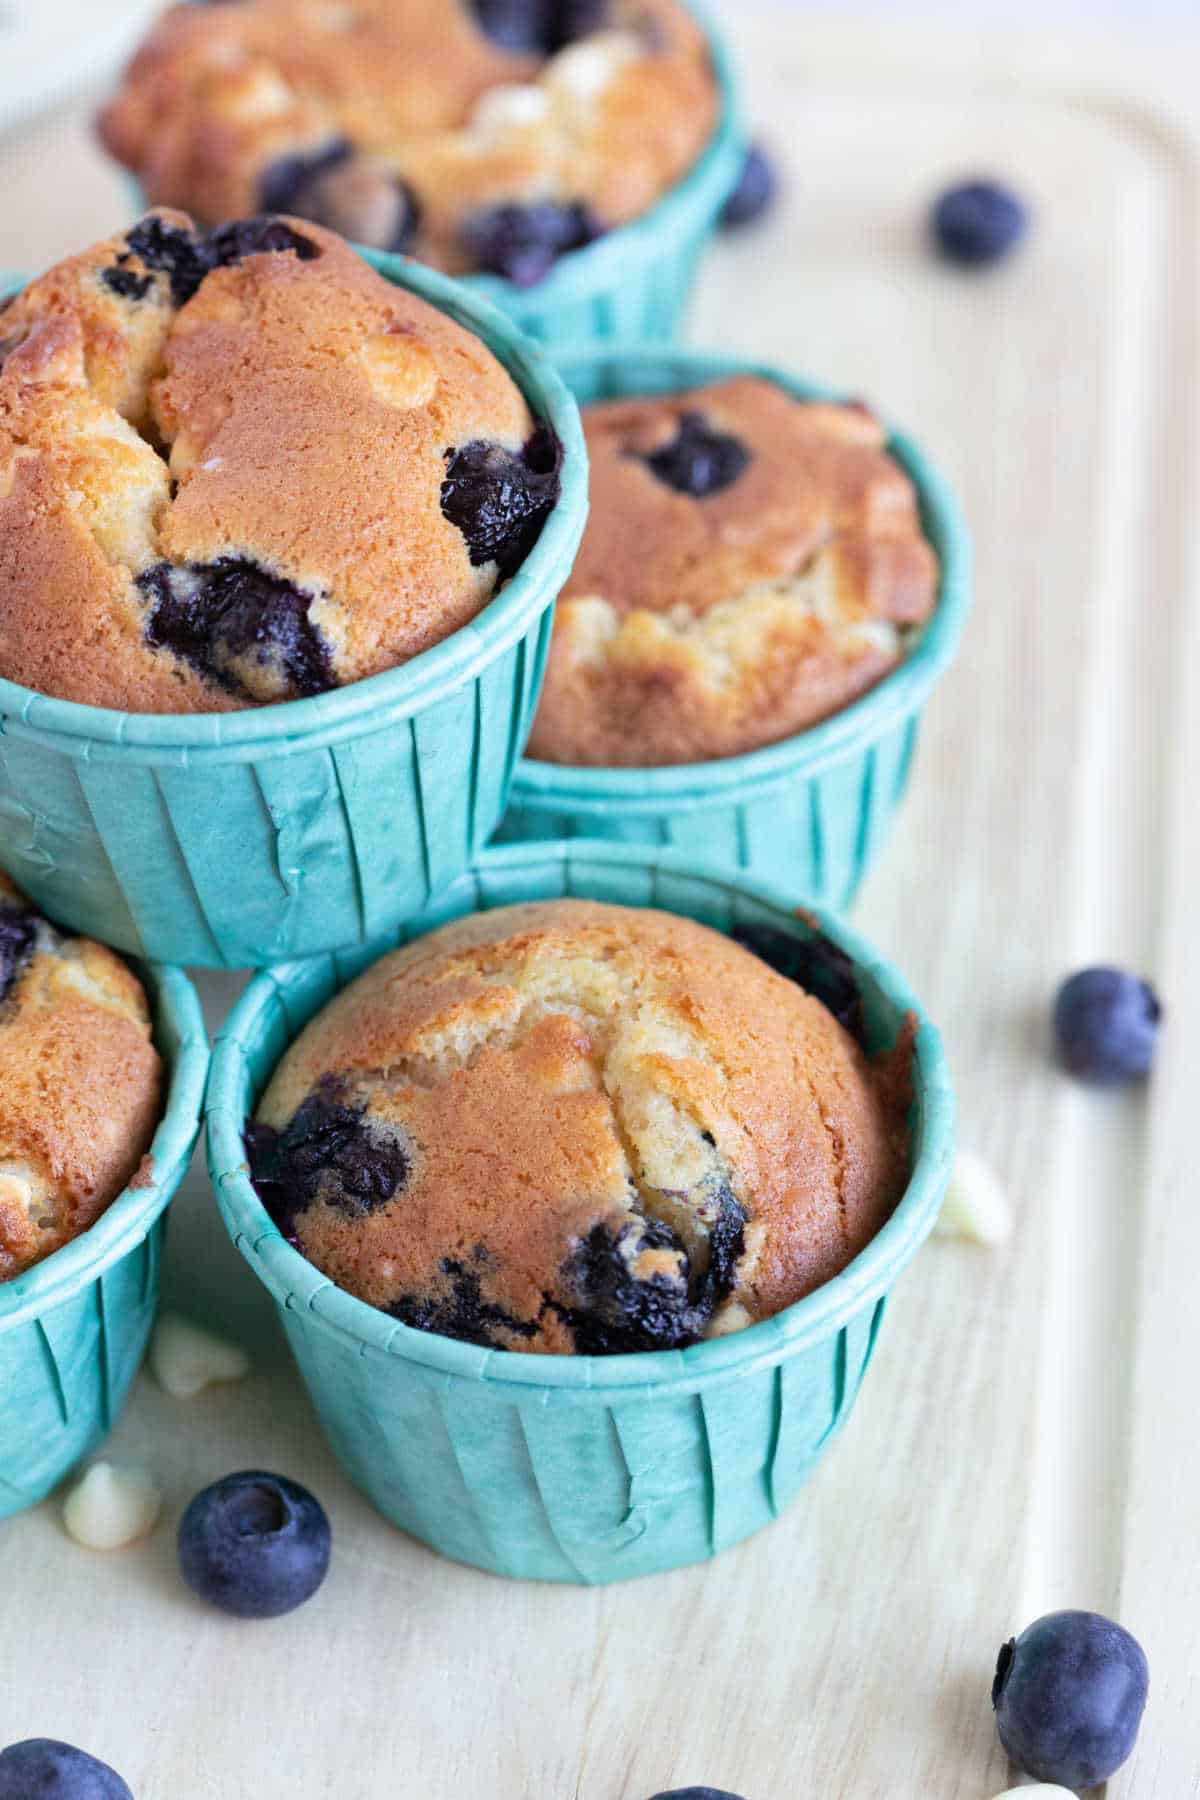 A stack of blueberry and white chocolate muffins.